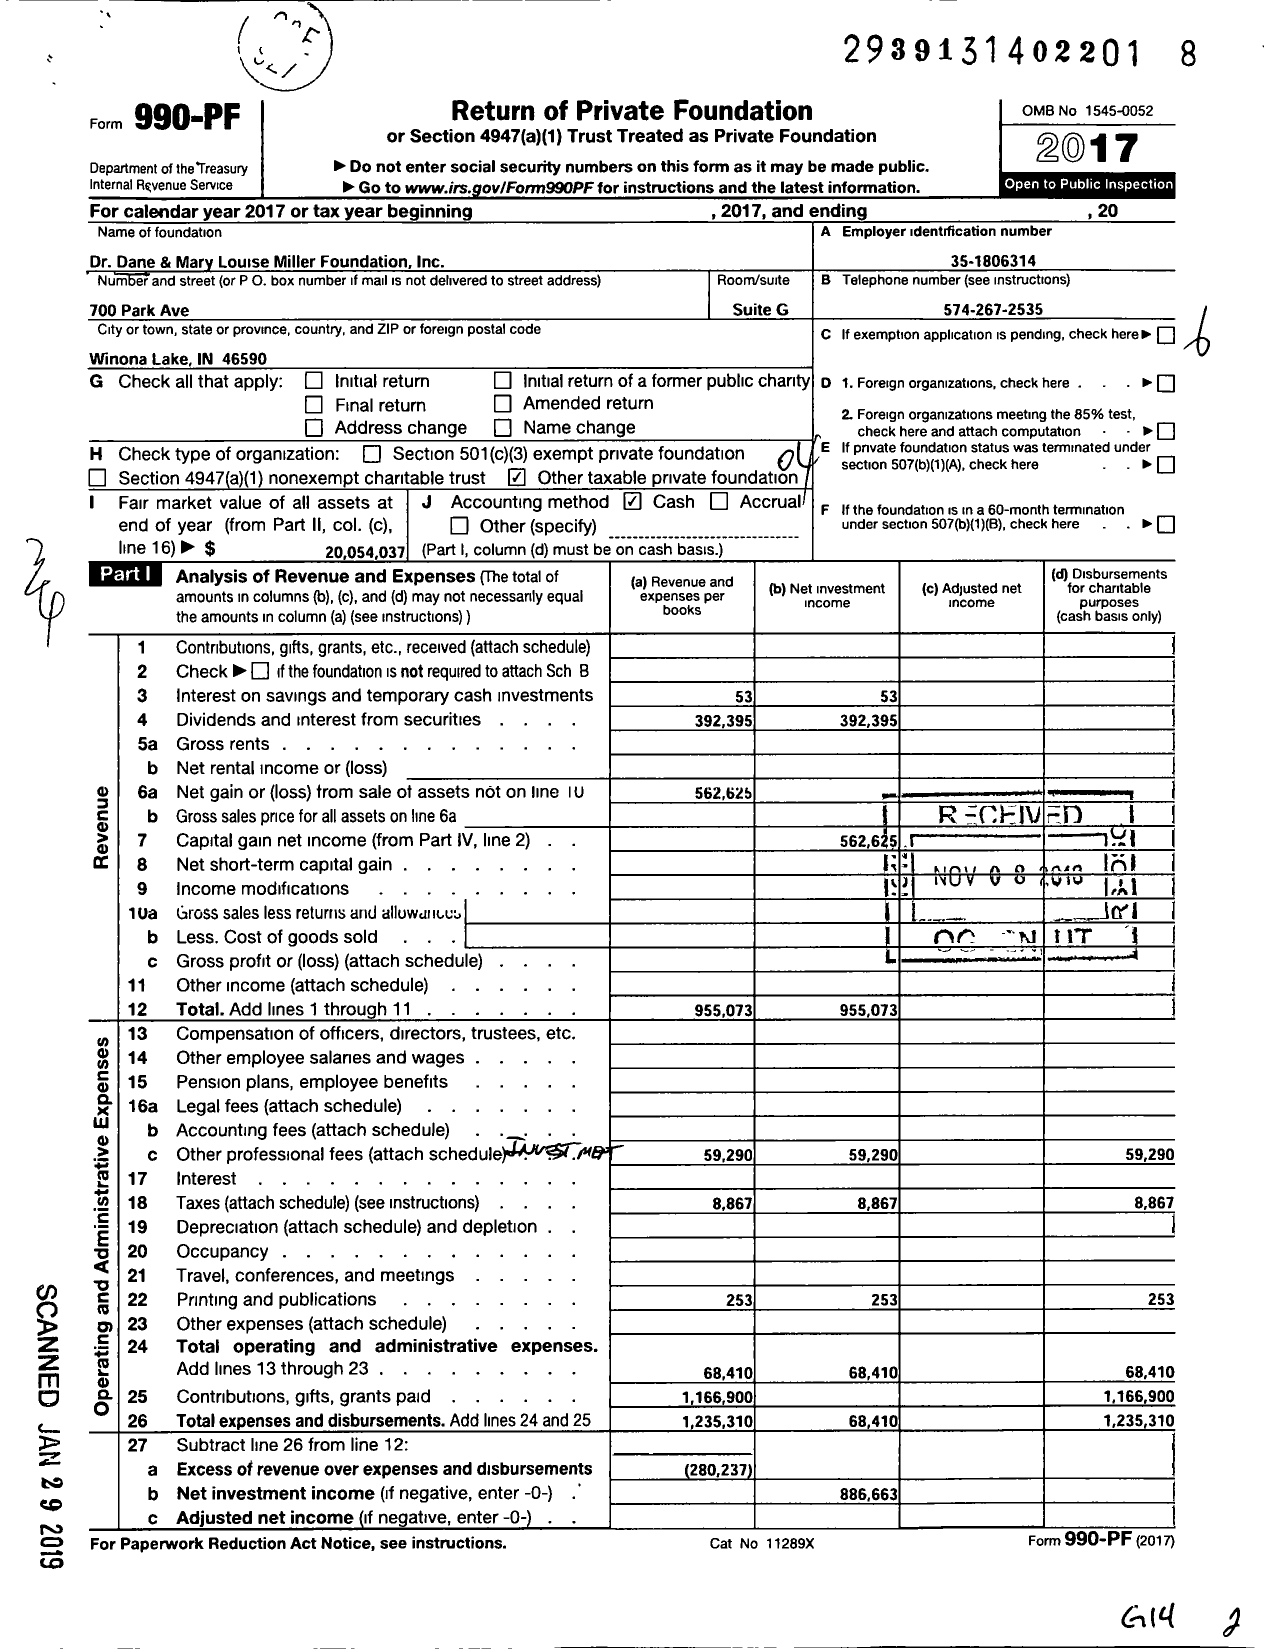 Image of first page of 2017 Form 990PF for Dane and Mary Louise Miller Foundation